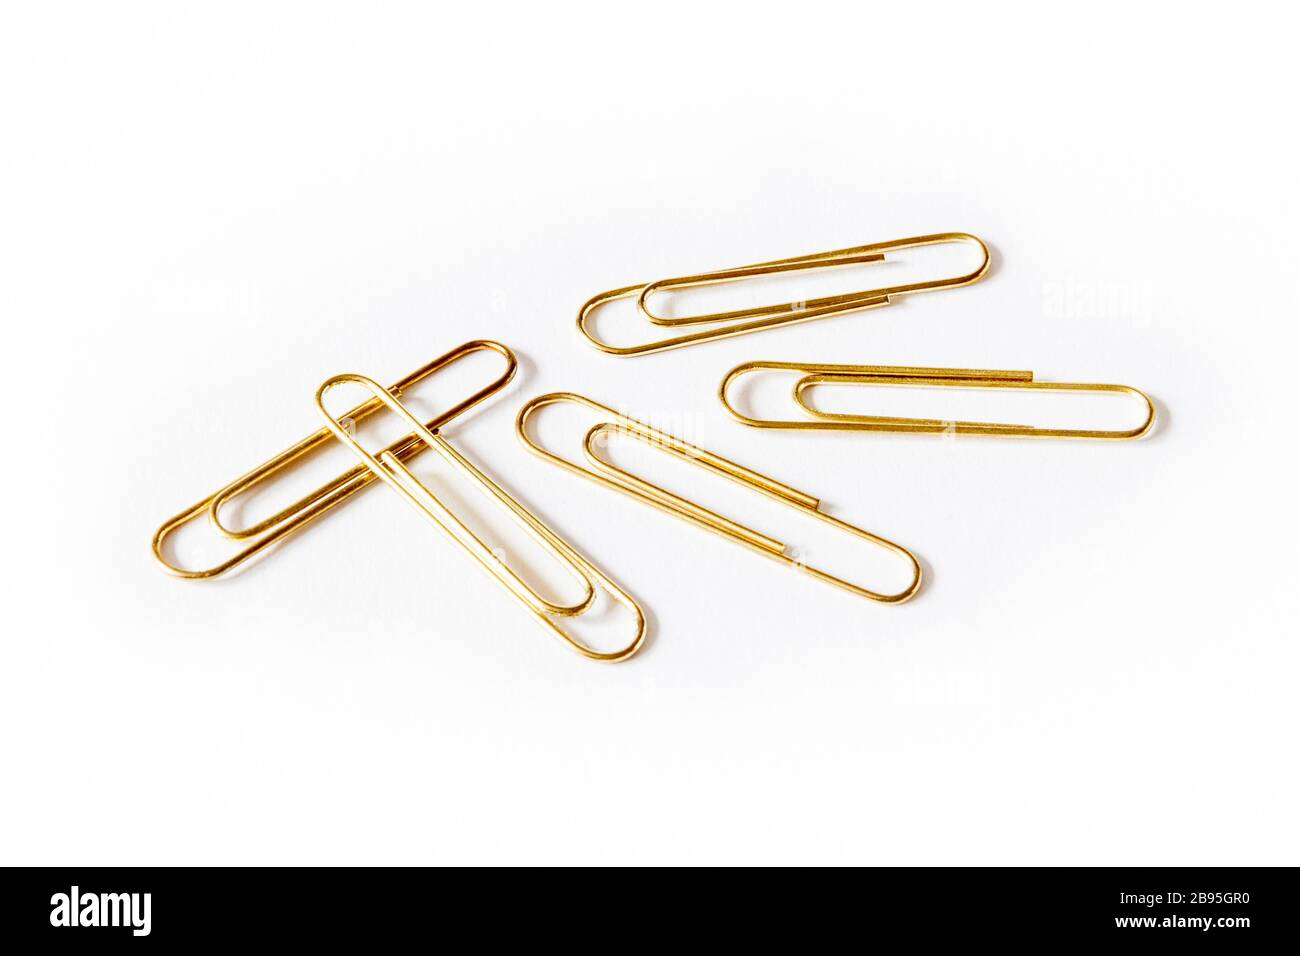 Five large gold-coloured paper clips on a white background Stock Photo